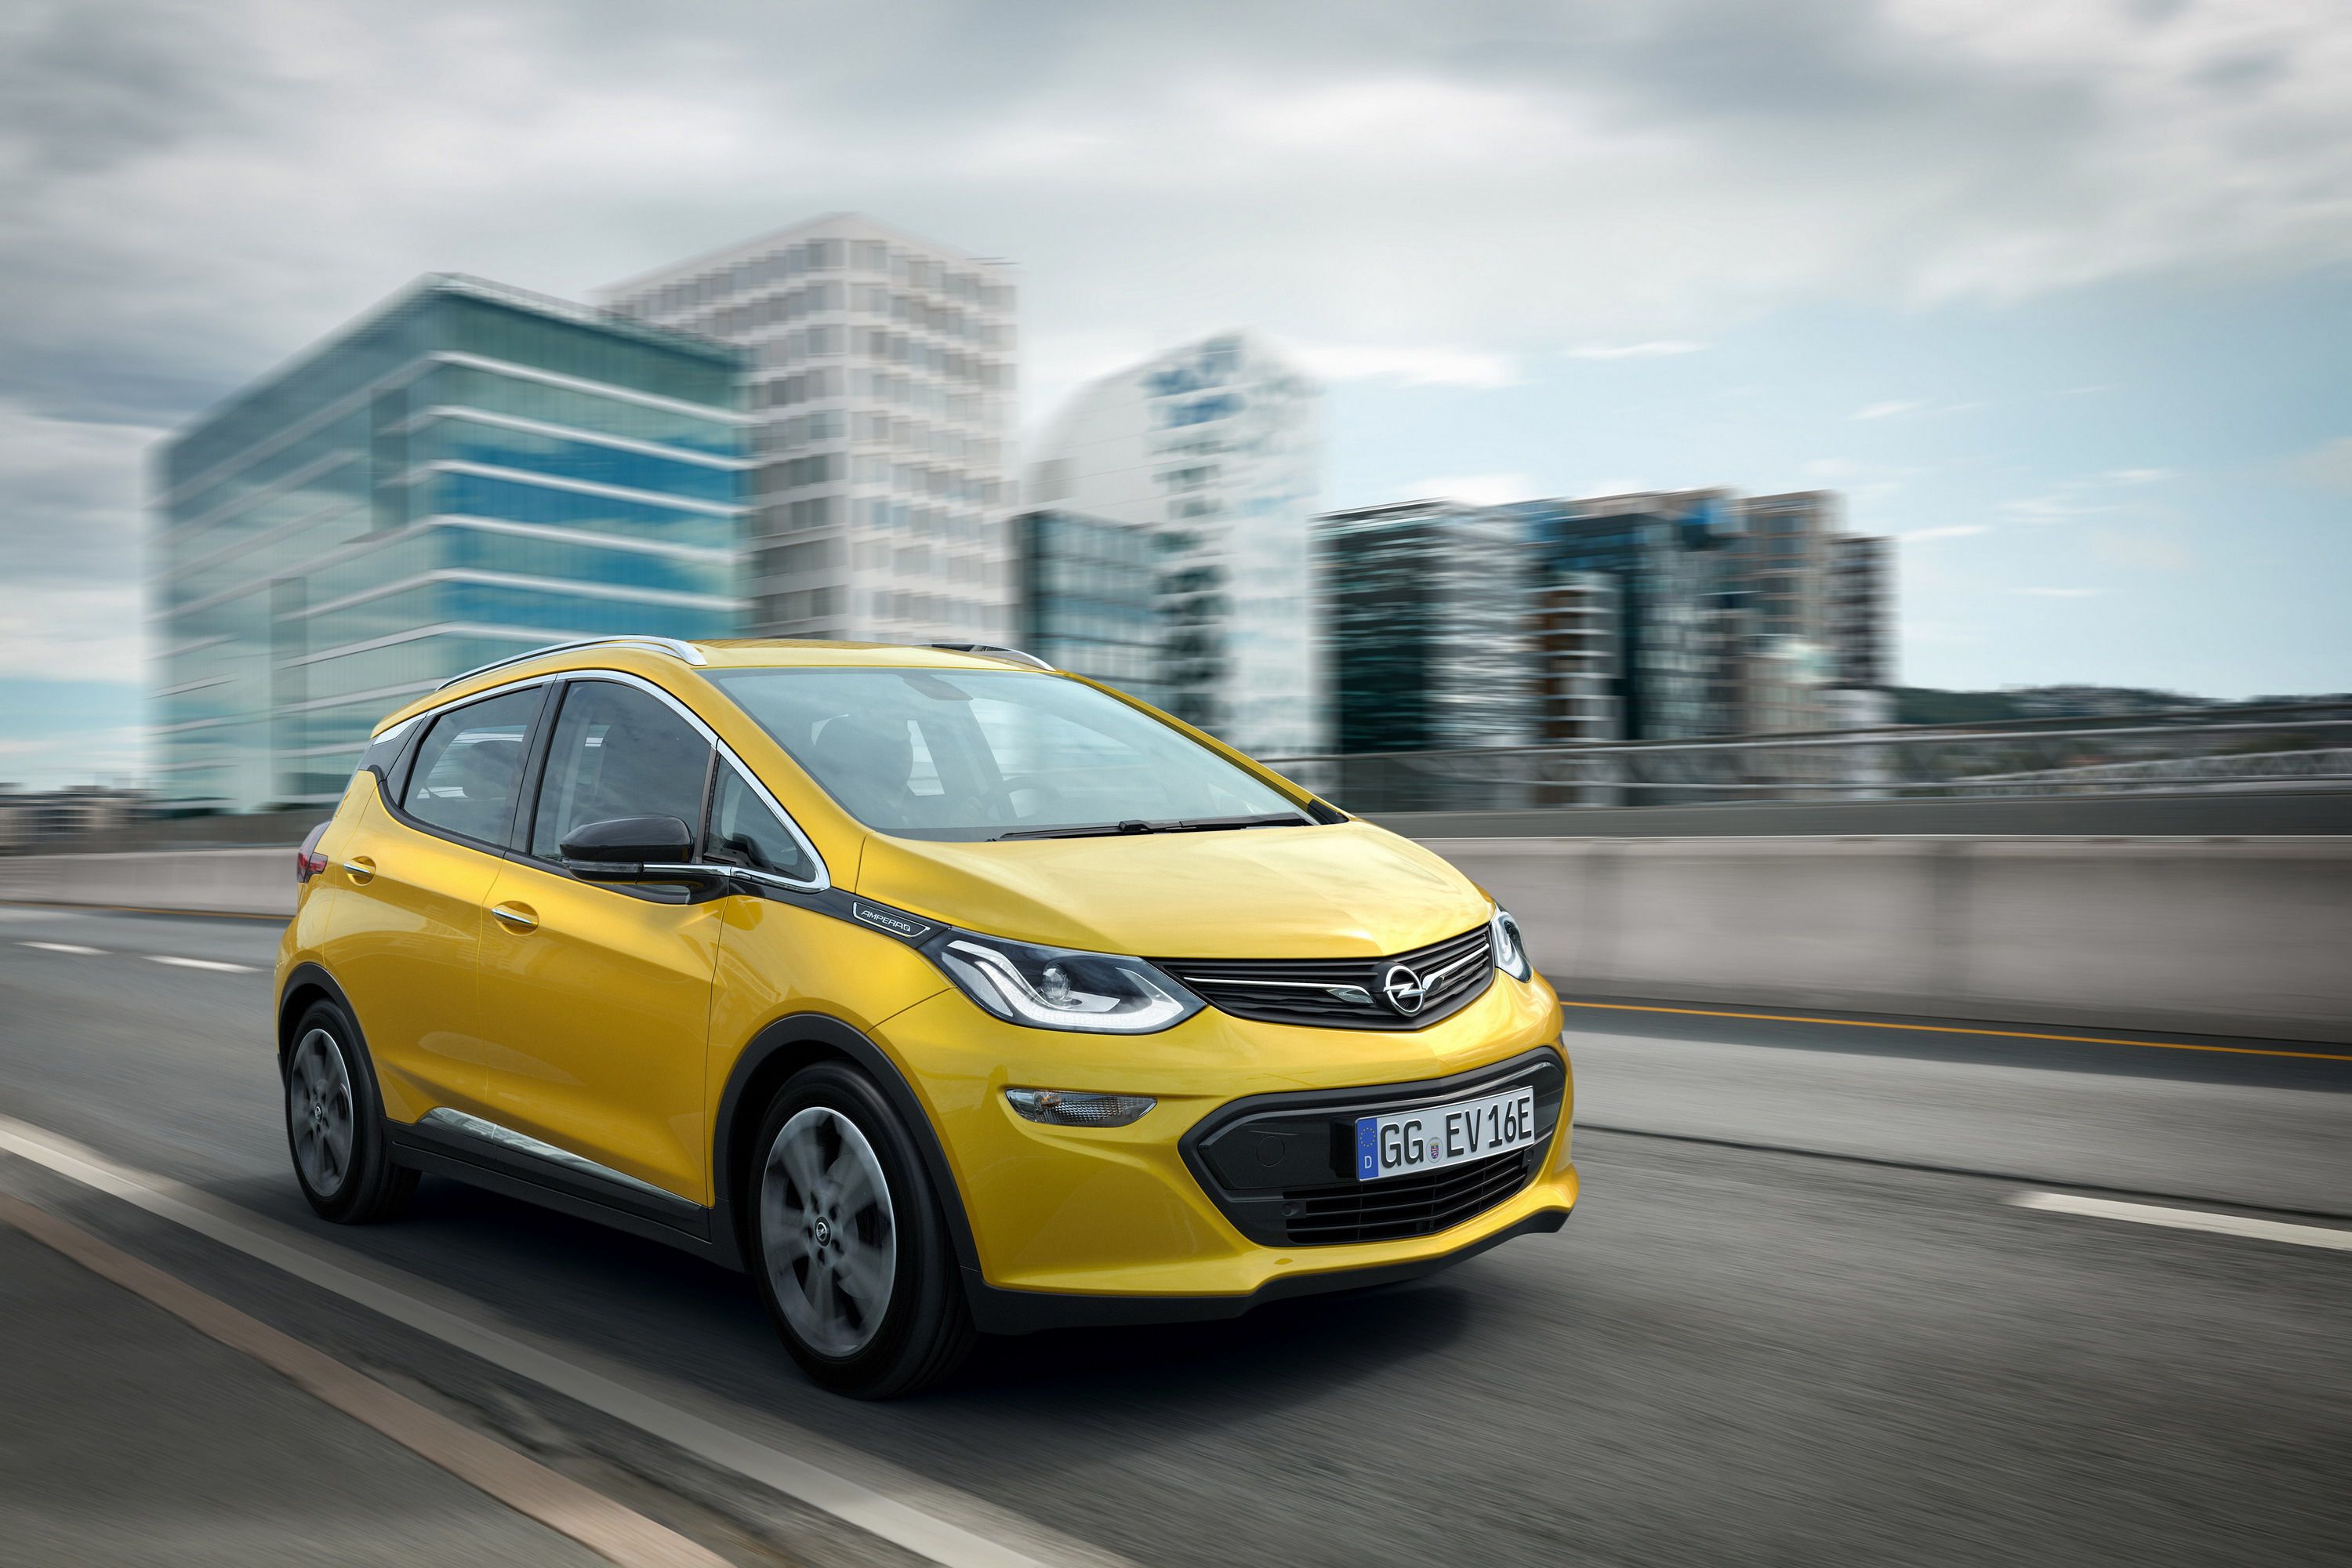 2017 Opel Hemorrhages $12k for Every Amepra-E (Rebadged Chevy Bolt) Sold